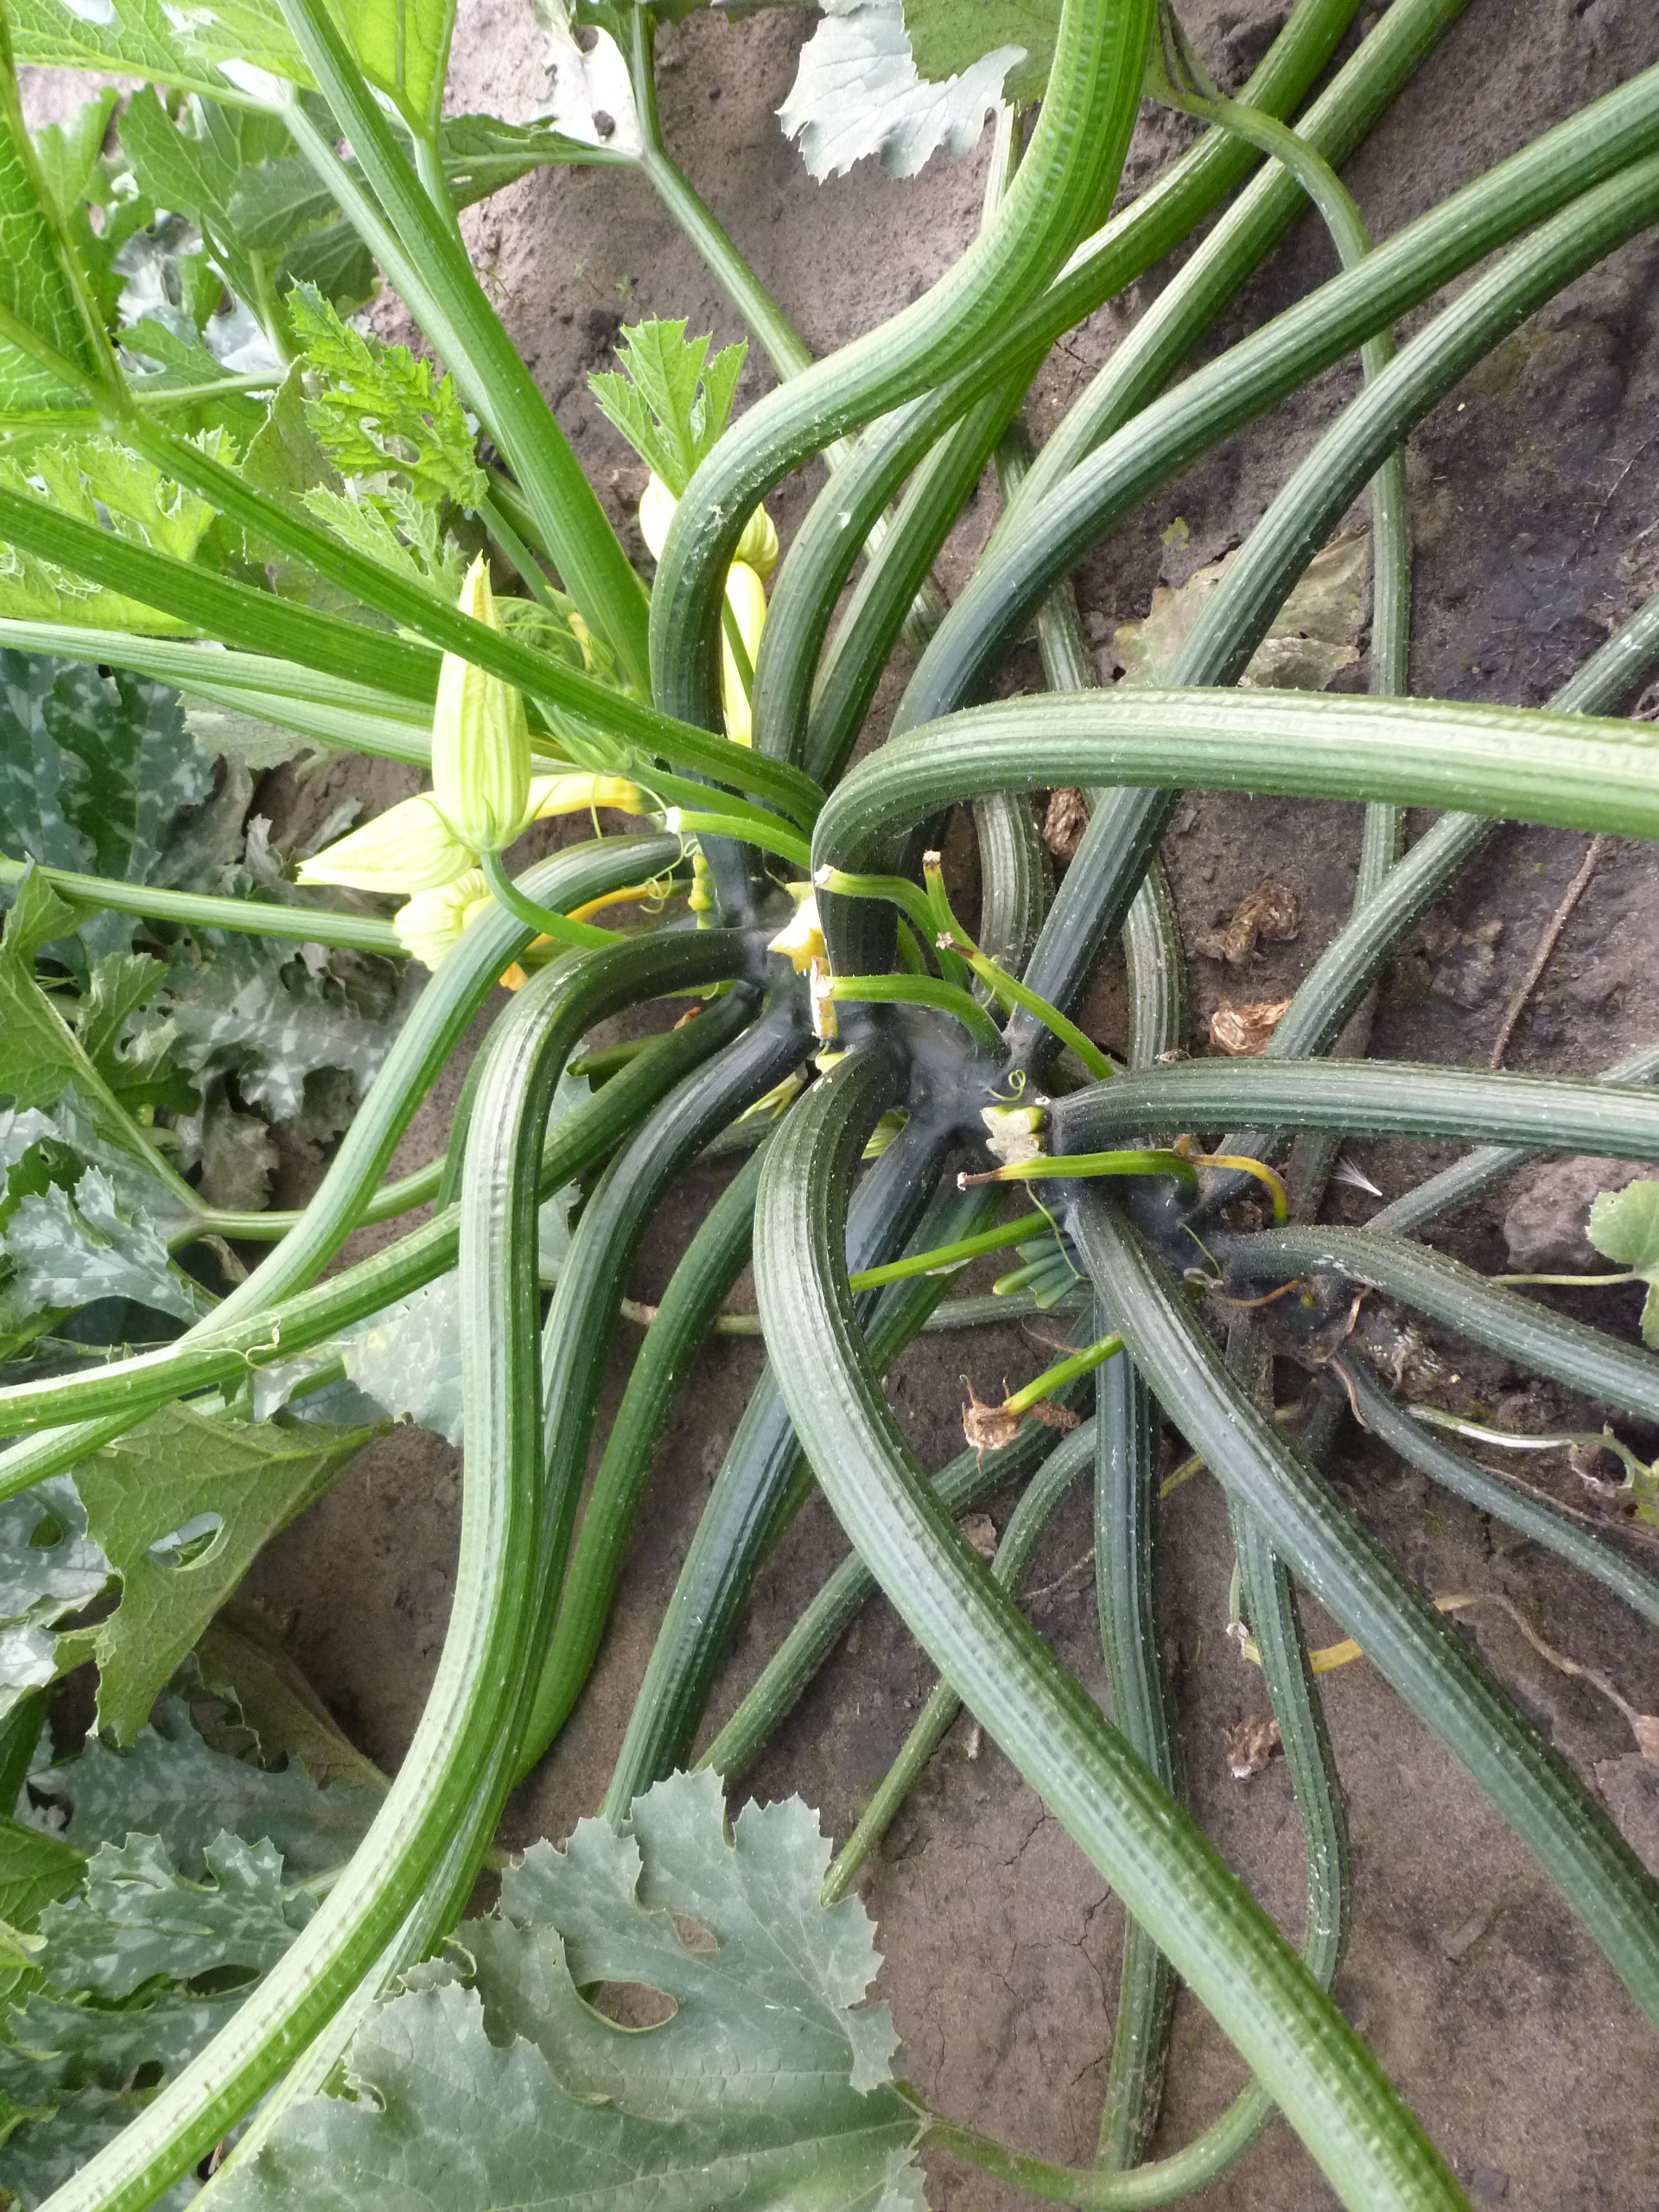 A zucchini plant, complete with freaky alien-like tentacles